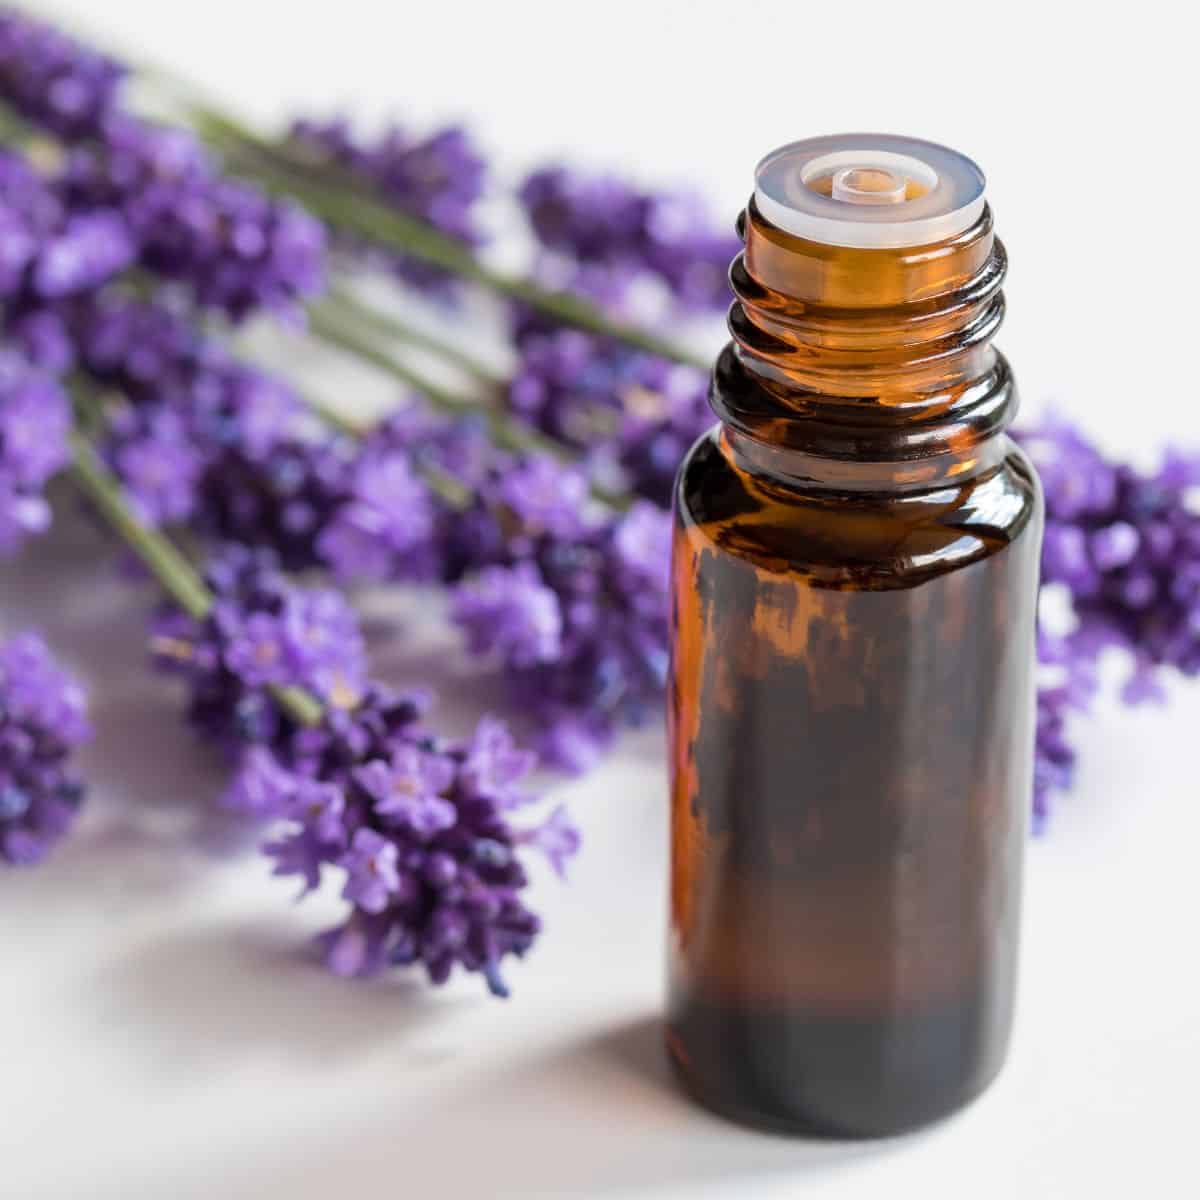 An essential oil dropper surrounded by lavender flowers.